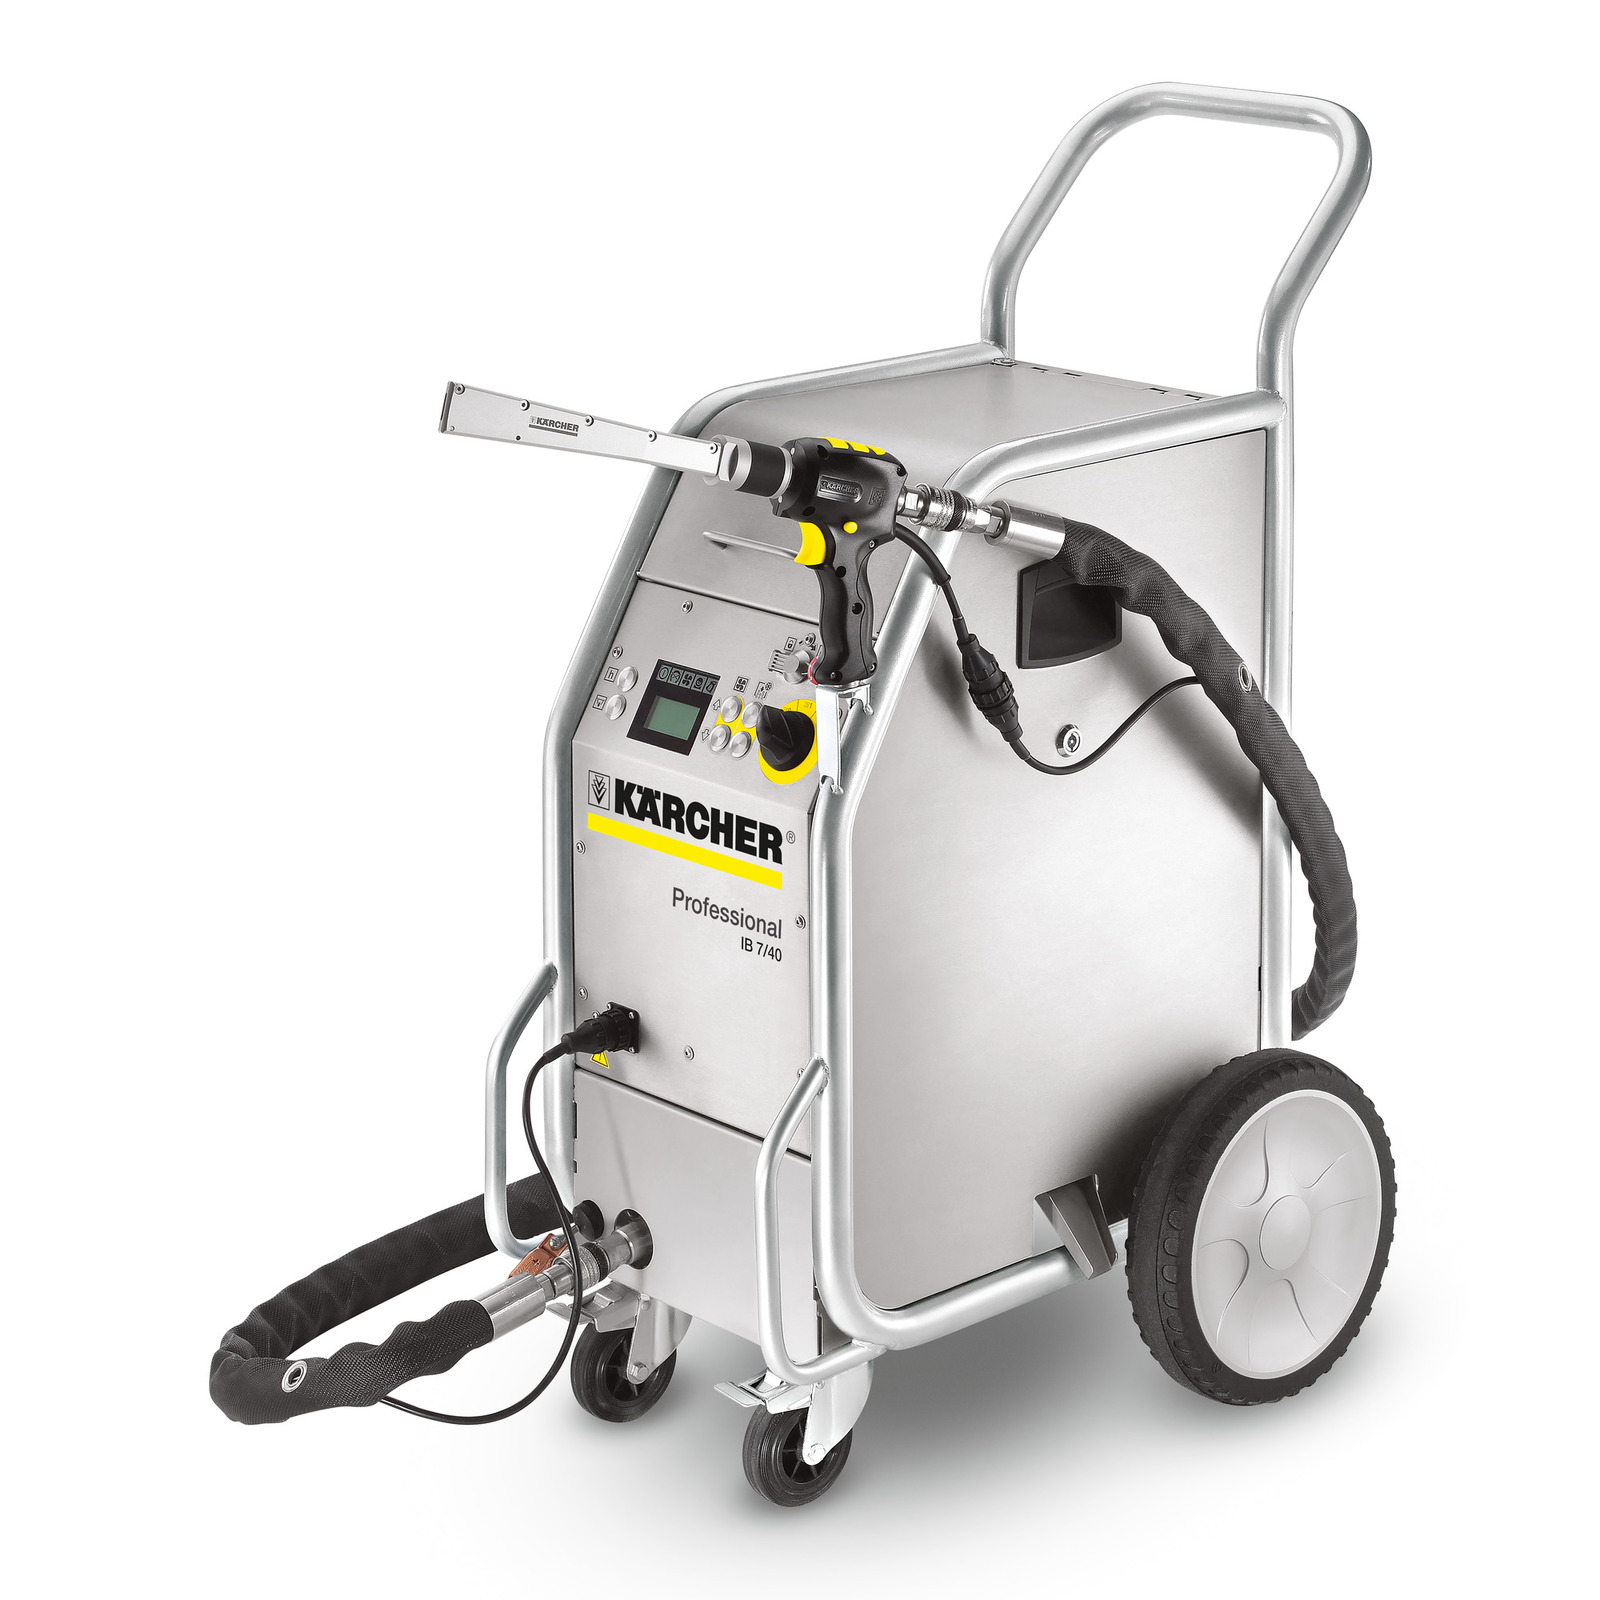  LUTIFIX 110V Dry Ice Blasting Machine,HTS705 Industrial Dry Ice  Blasting Cleaning Machine,Dry Ice Blast Cleaners for Removing All Kinds of  Intractable Dirt Quickly. : Automotive